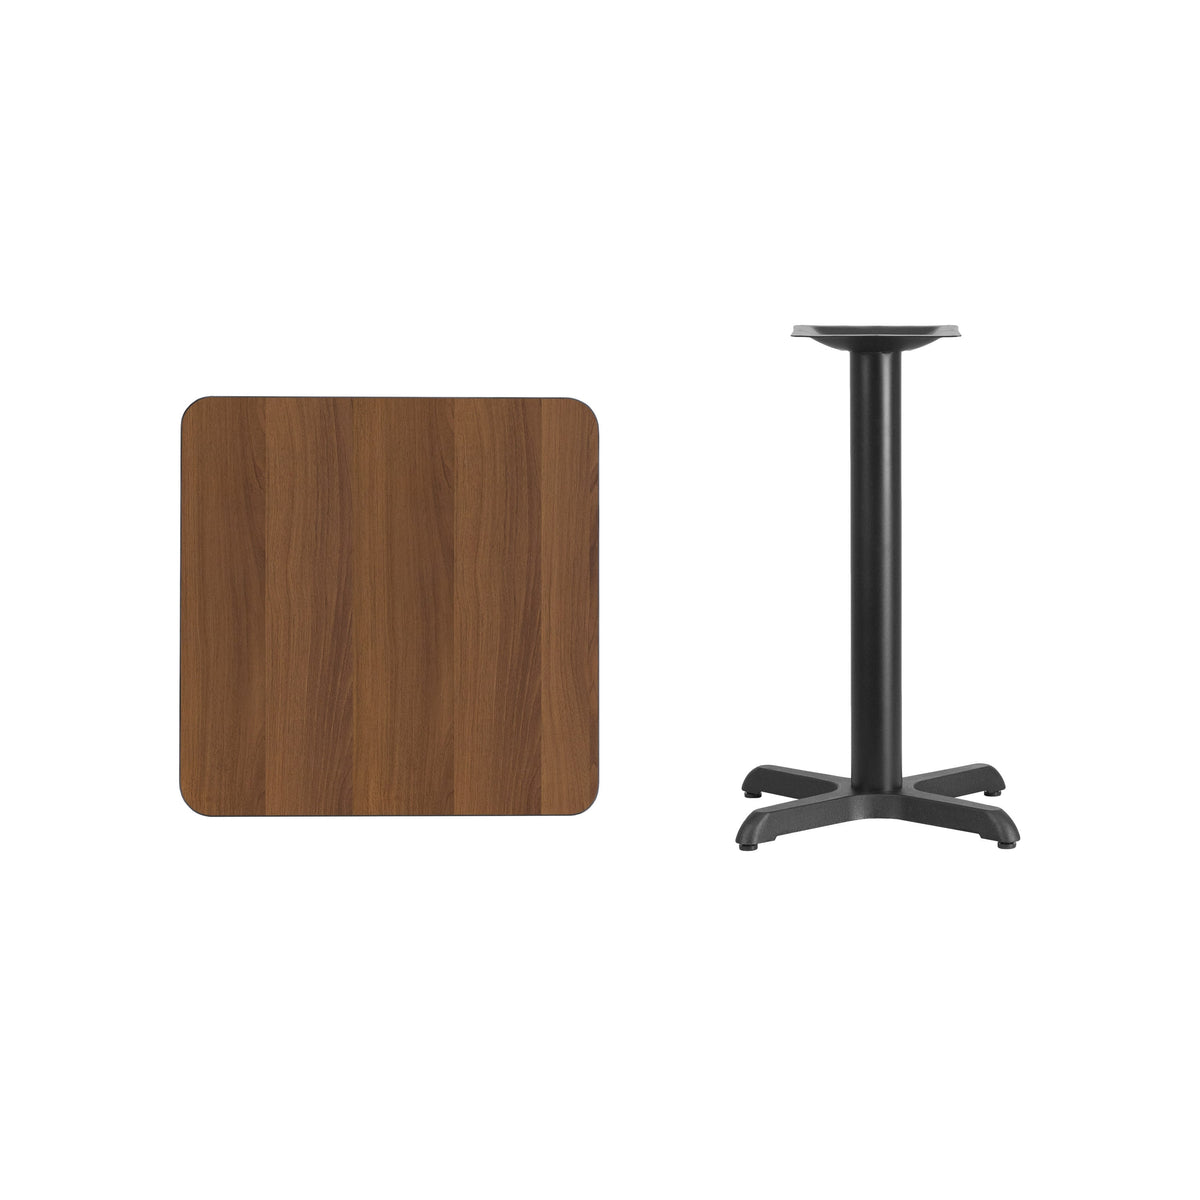 Walnut |#| 24inch Square Walnut Laminate Table Top with 22inch x 22inch Table Height Base